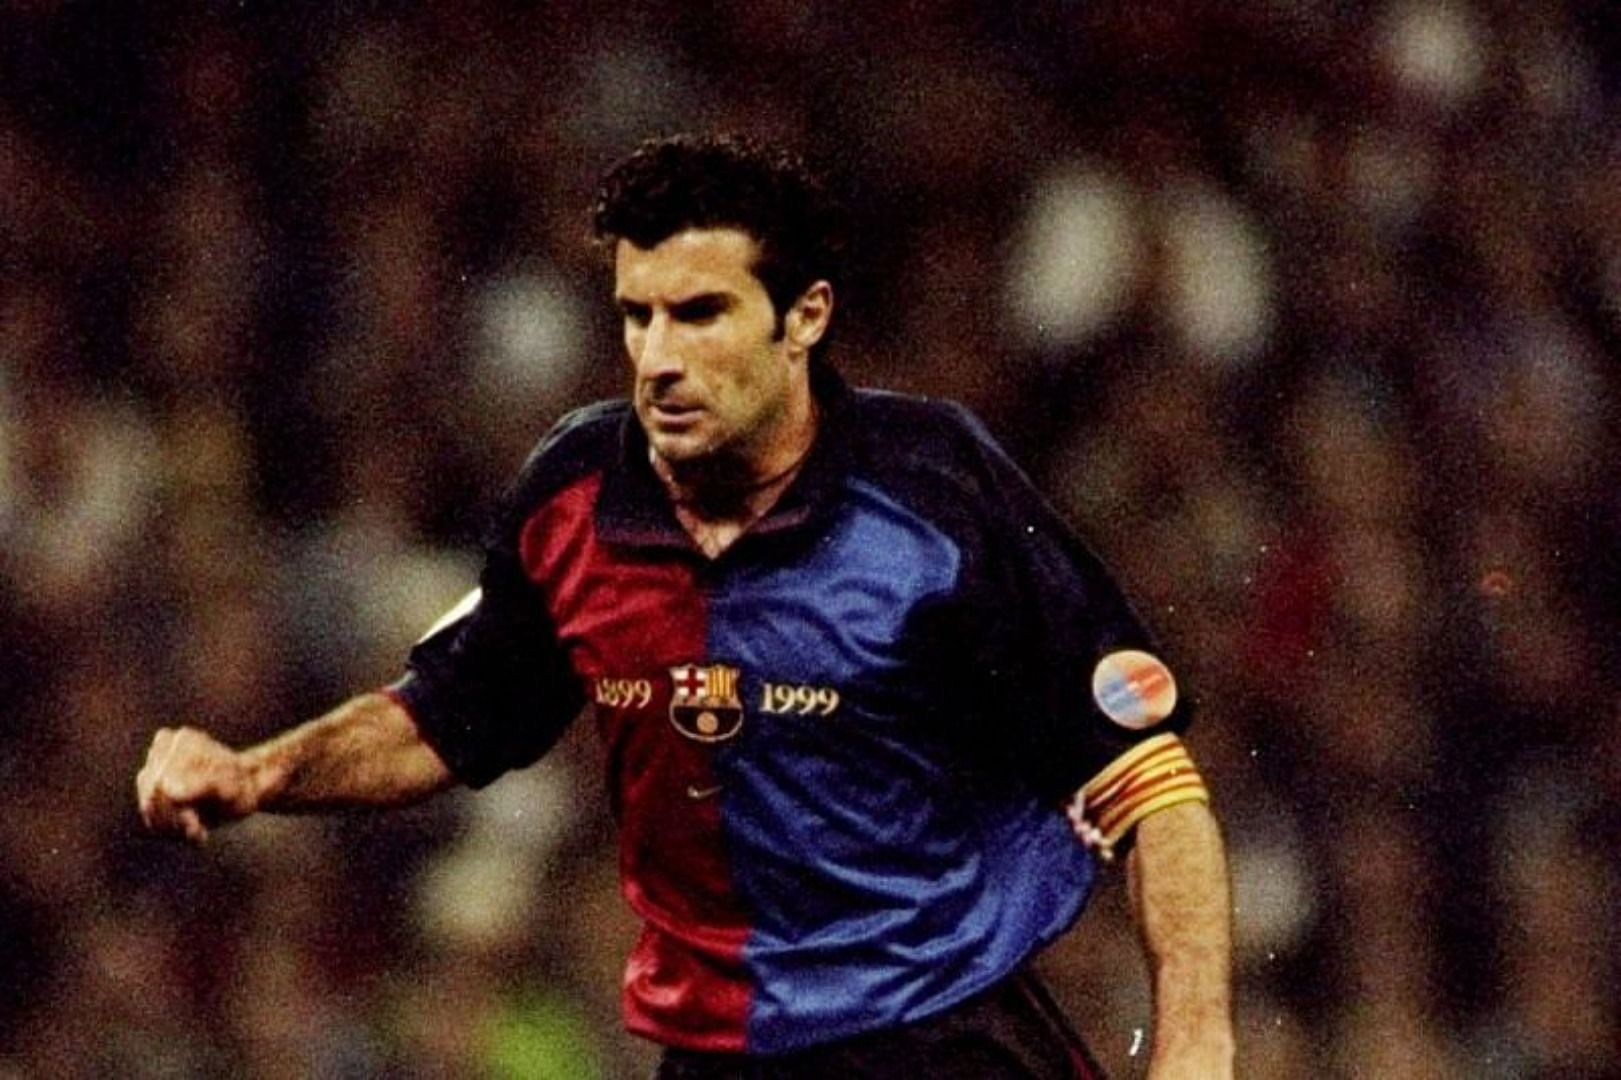 Figo is famous for his direct transfer from Barcelona to Real Madrid.